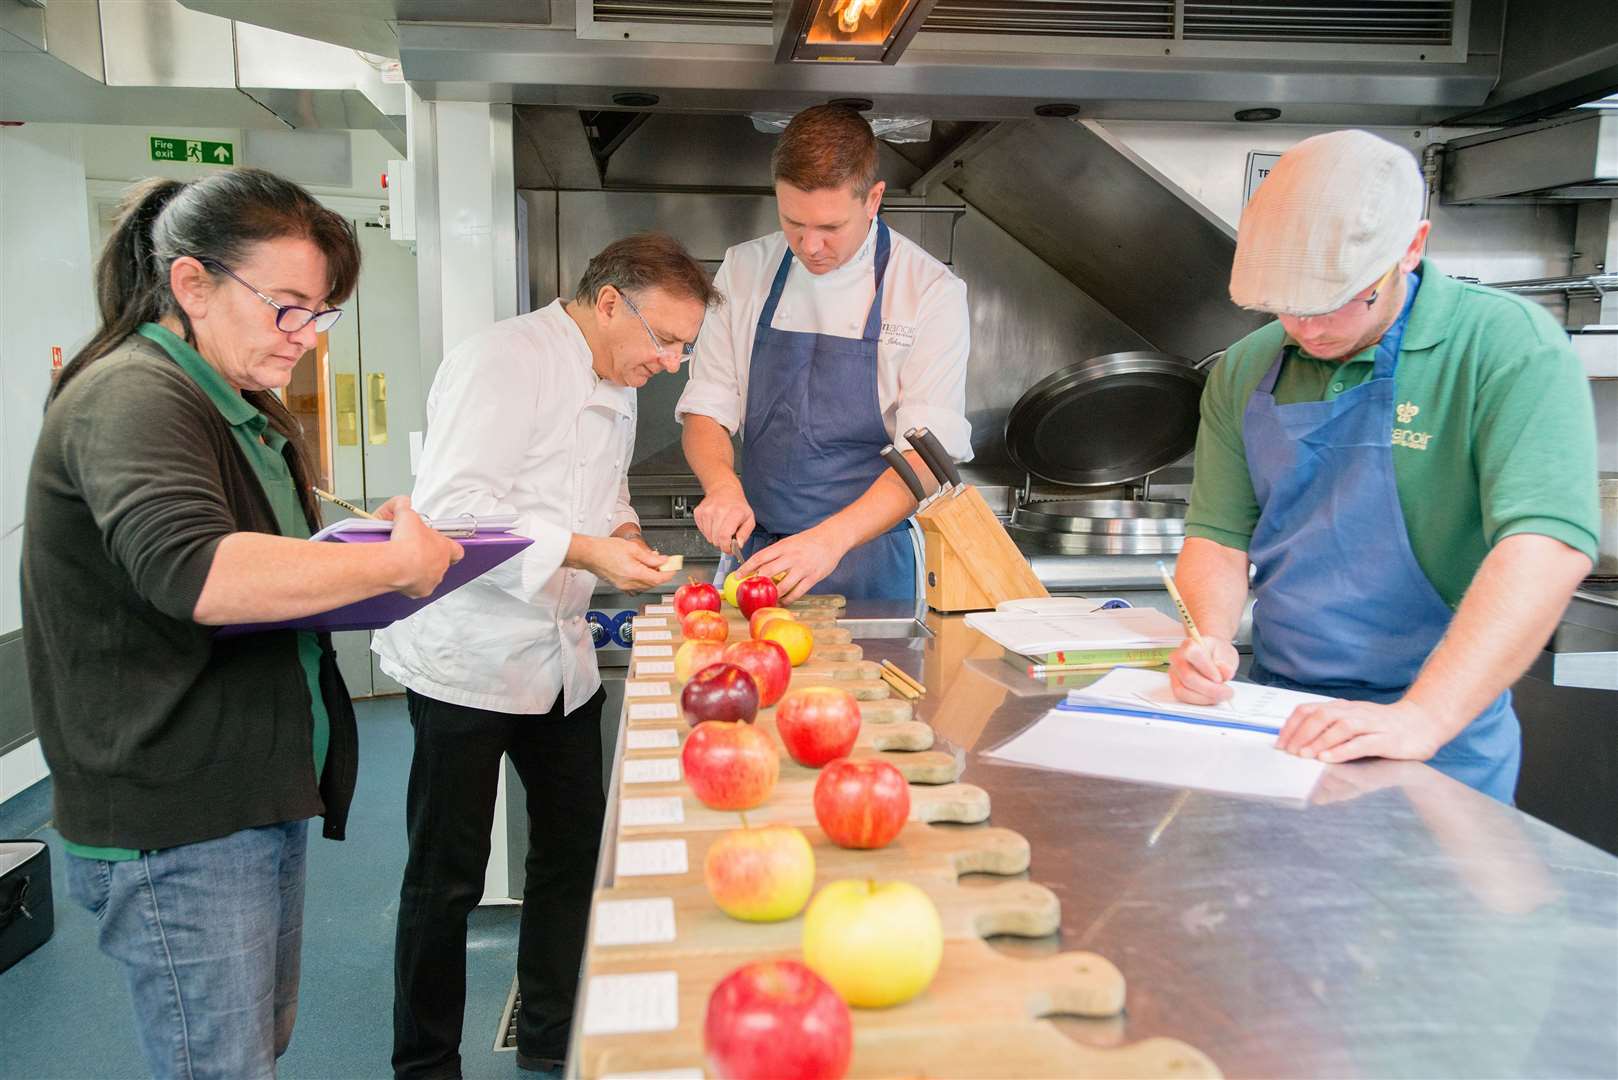 Raymond Blanc and his team testing apples. Picture: Paul Wilkinson/PA